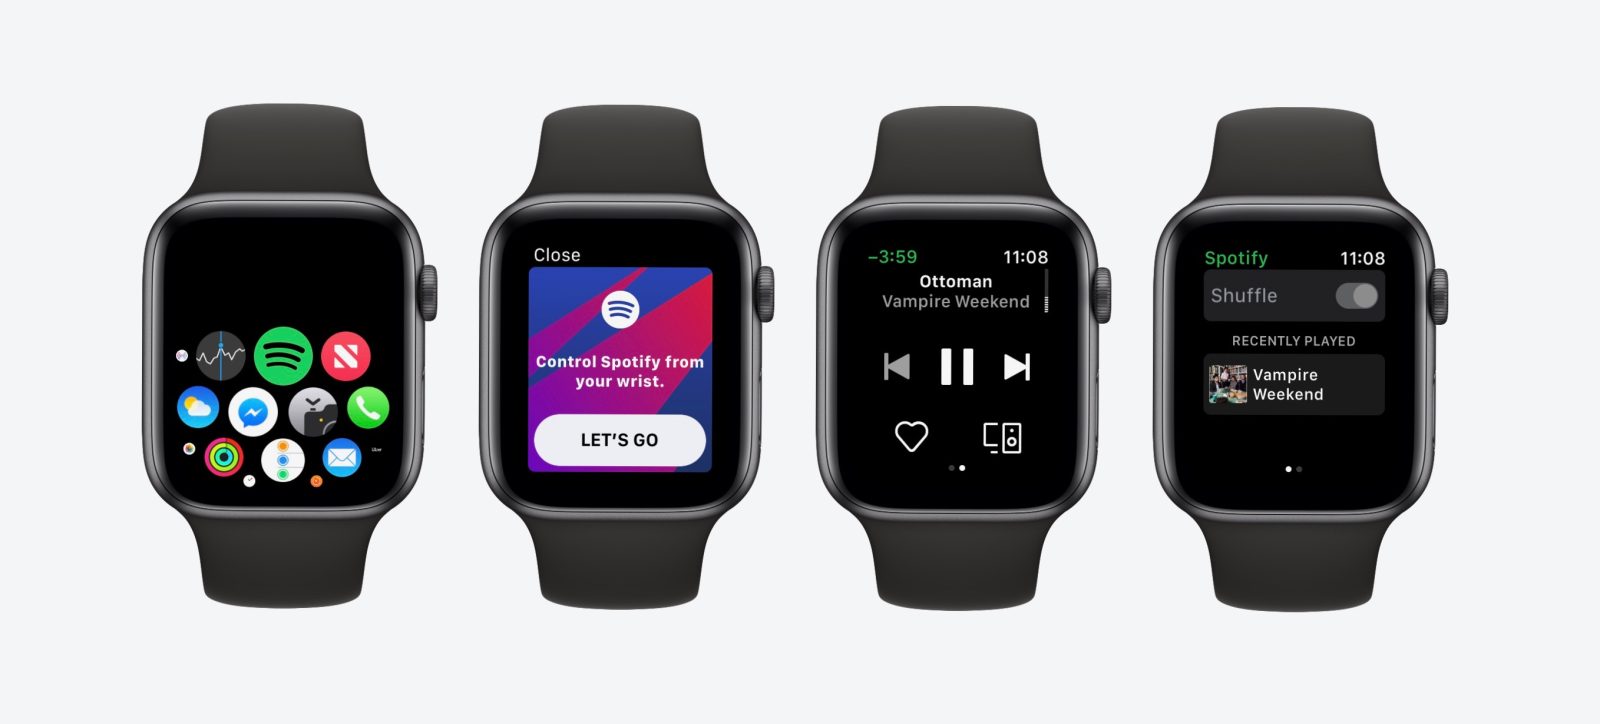 How to get Spotify on Apple Watch